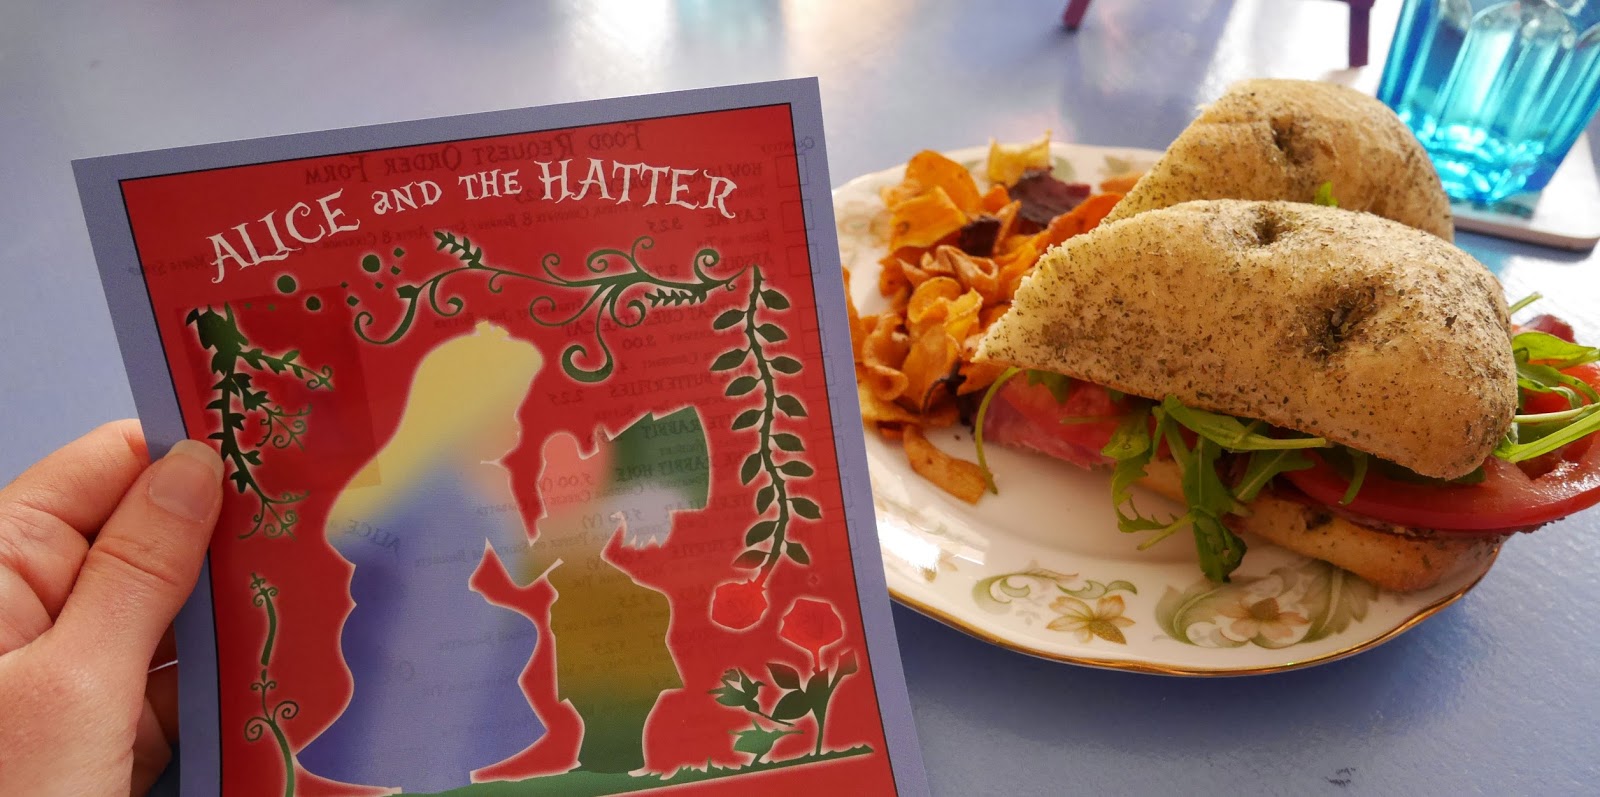 'The Hatter' sandwich at Alice and the Hatter in Canterbury, Kent